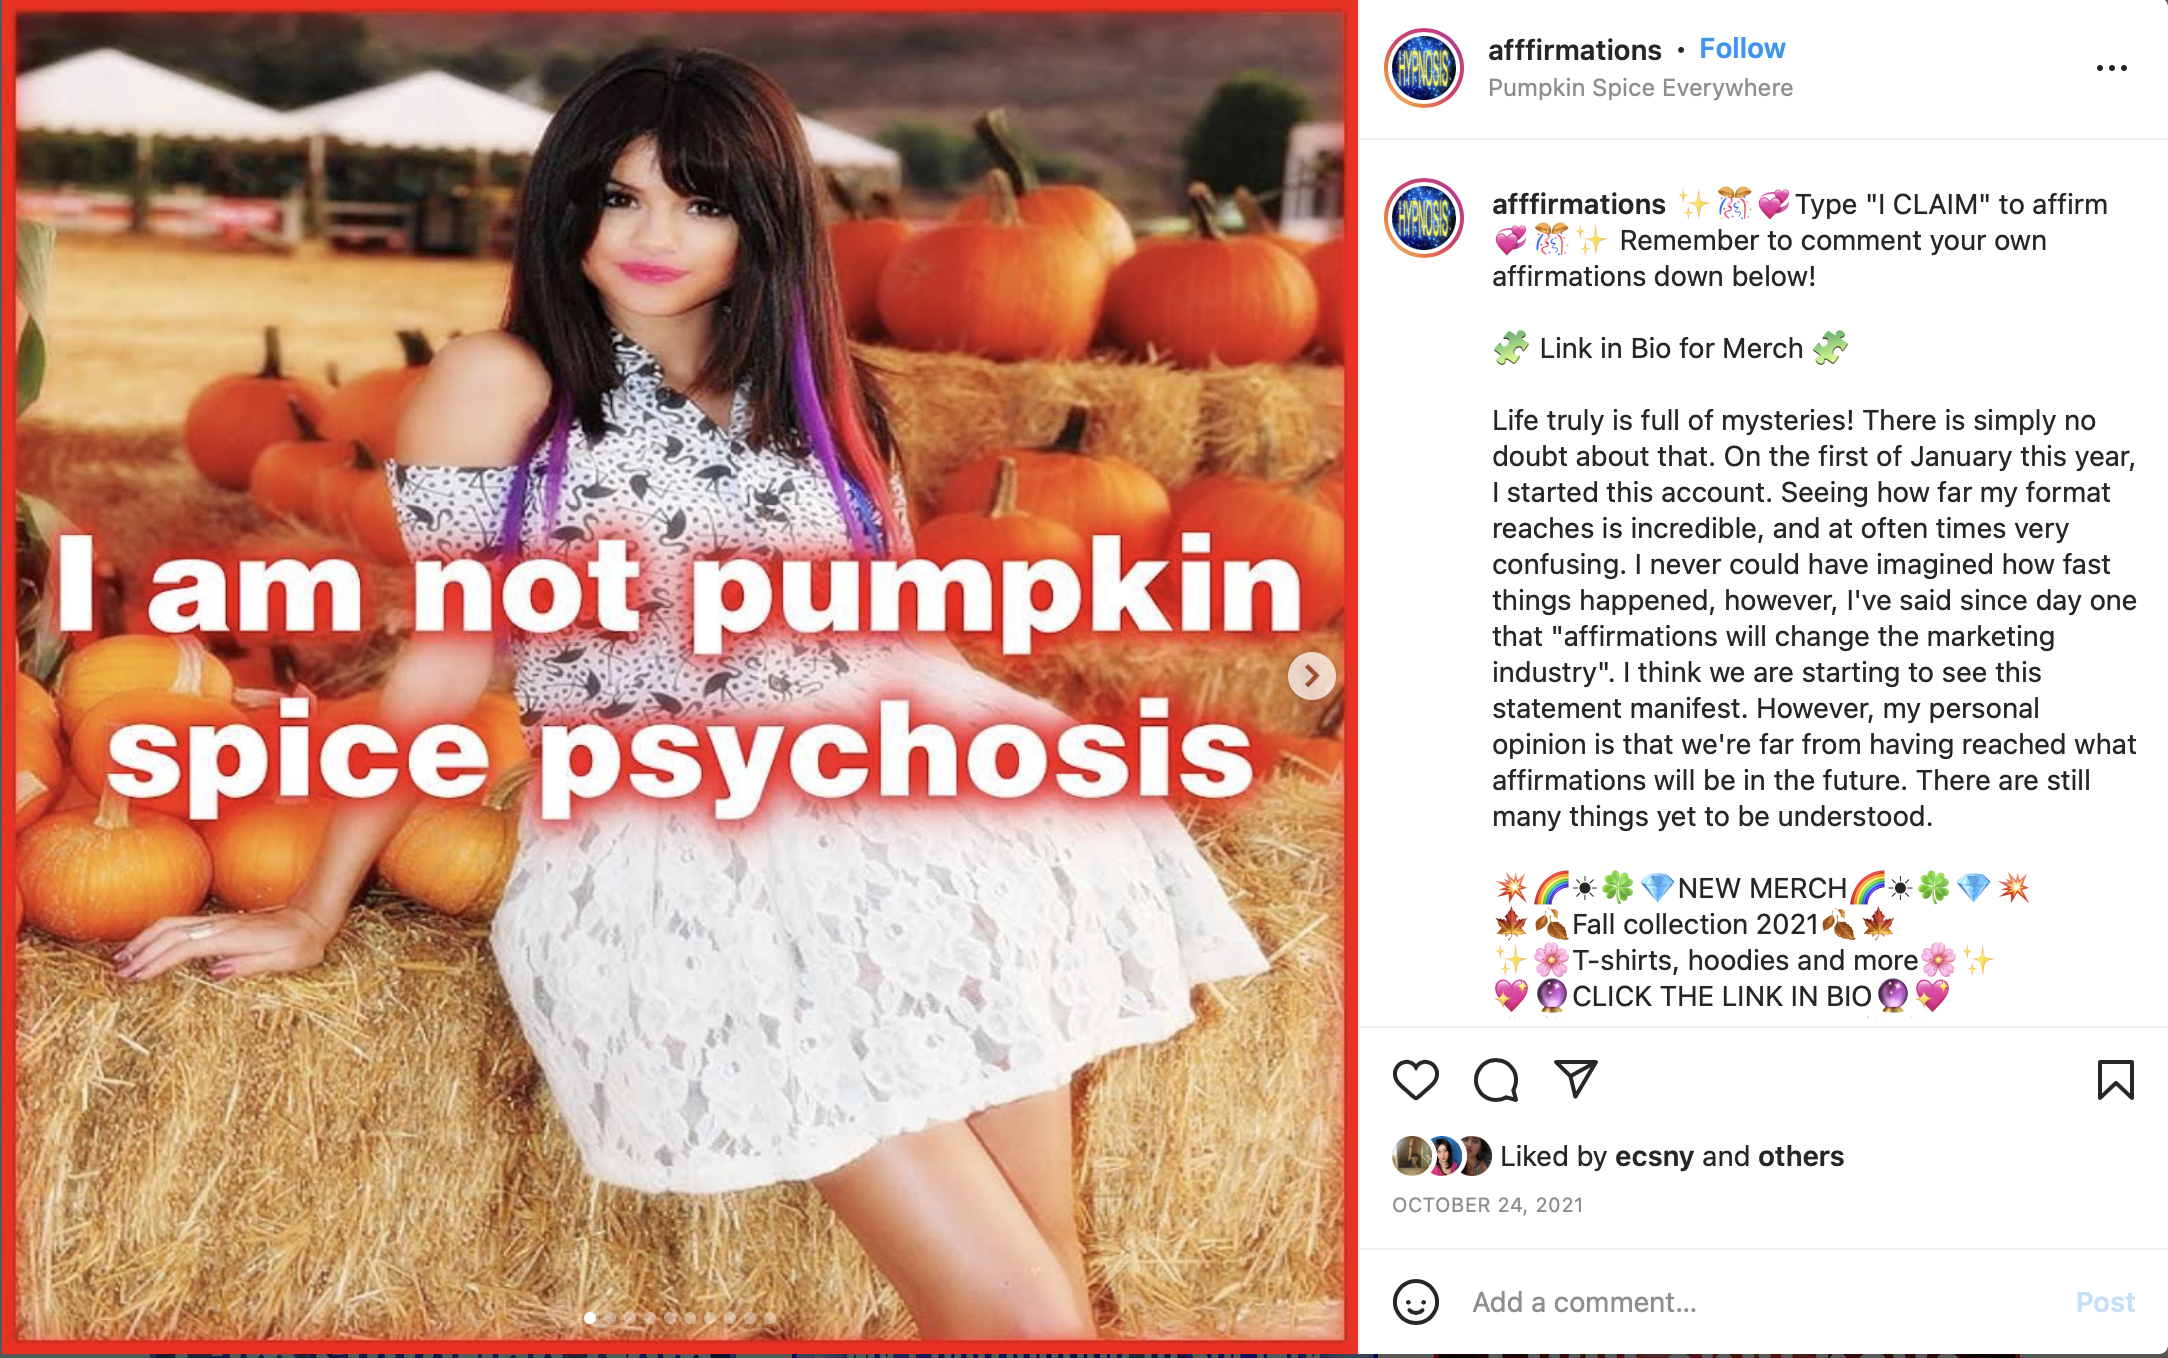 selena gomez poses on a hay bale full of pumpkins with purple clip in extensions between her brunette hair and there is a glowing caption over top that says i am not pumpkin spice psychosis - the image is a screenshot from instagram that also shows a caption asking followers to claim the affirmation and write their own in the comments